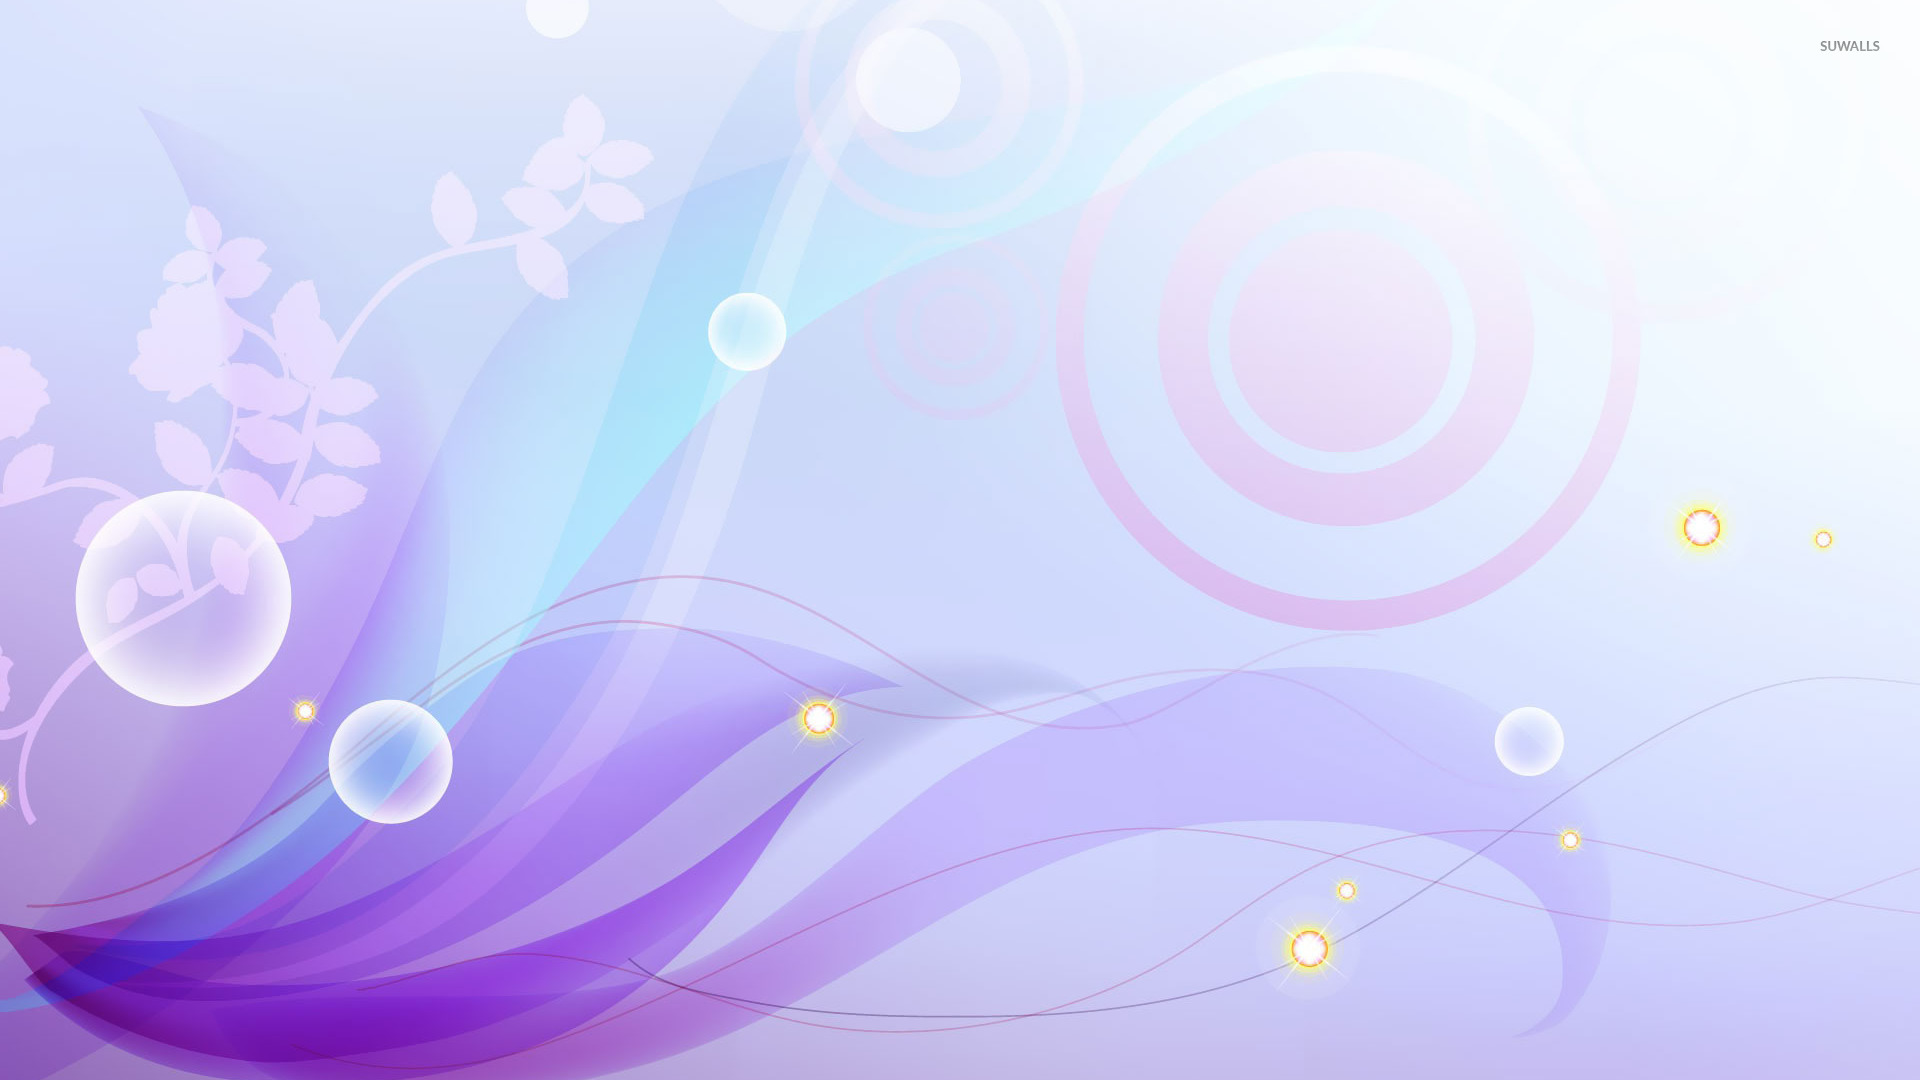 Purple curves and circles wallpaper - Abstract wallpapers - #18831